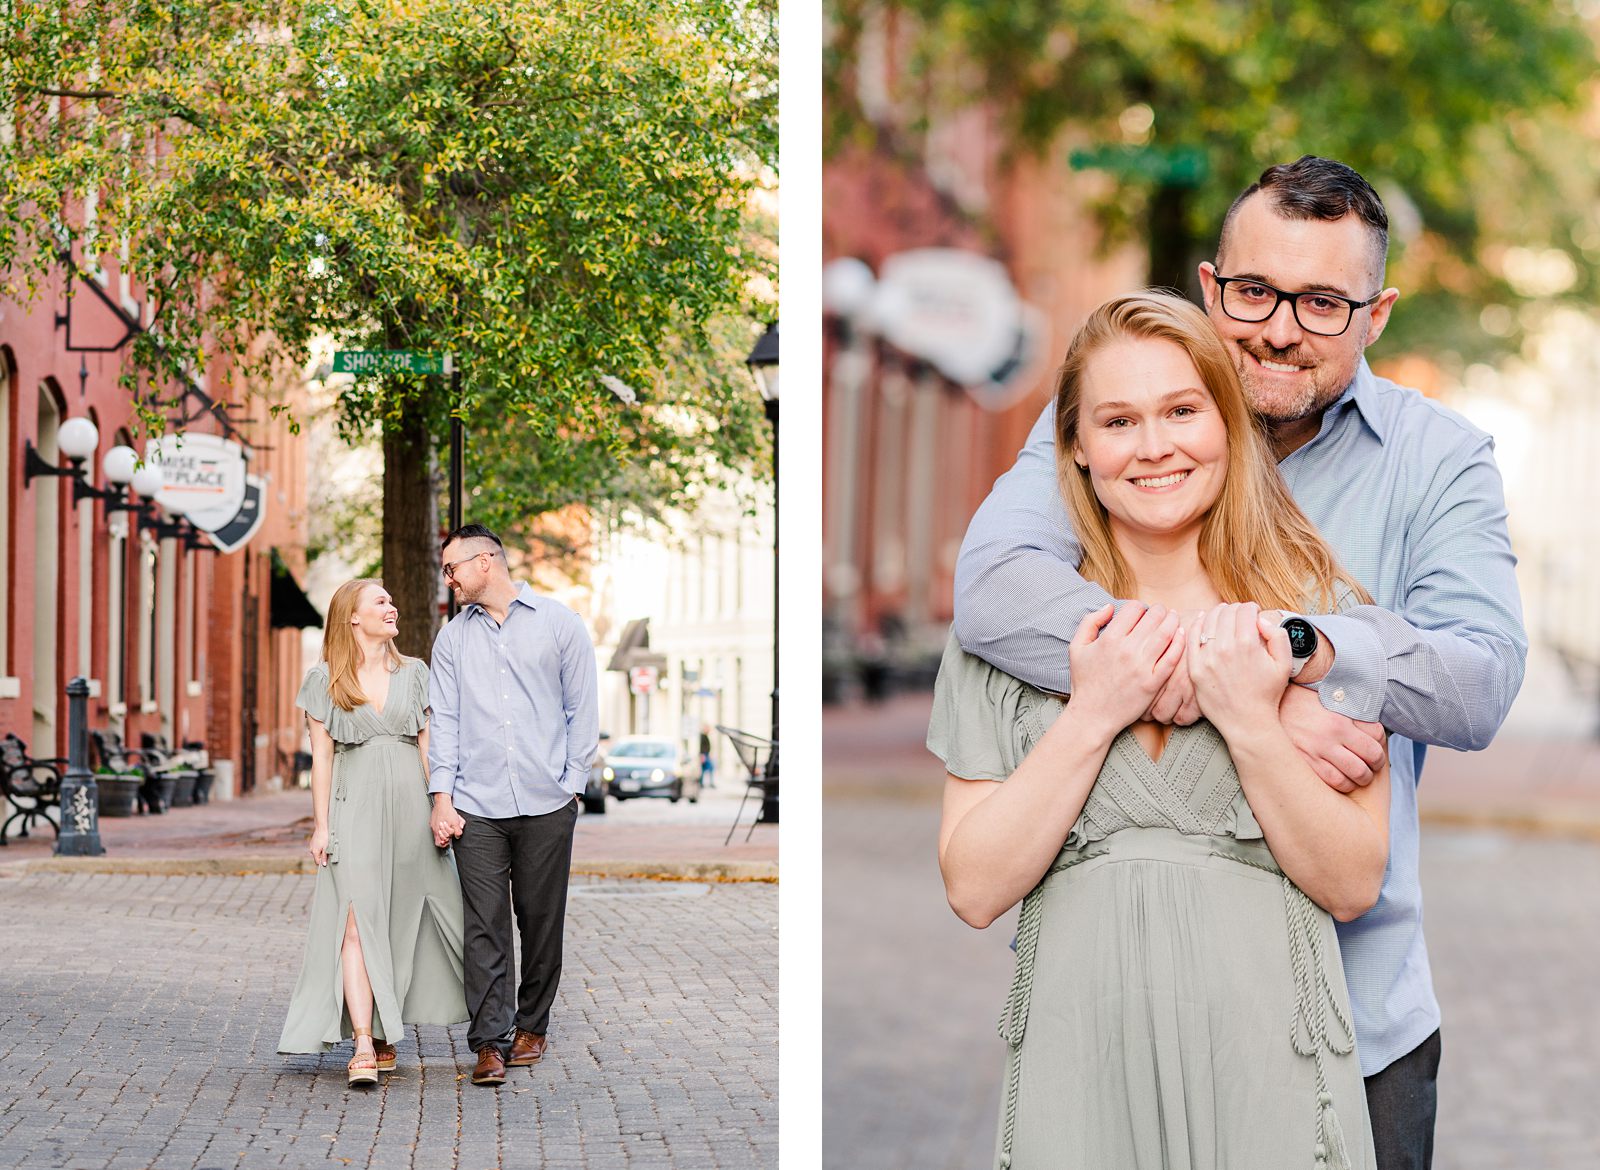 Downtown Richmond Engagement Session by Urban Farmhouse. Wedding Photographer Kailey Brianne Photography